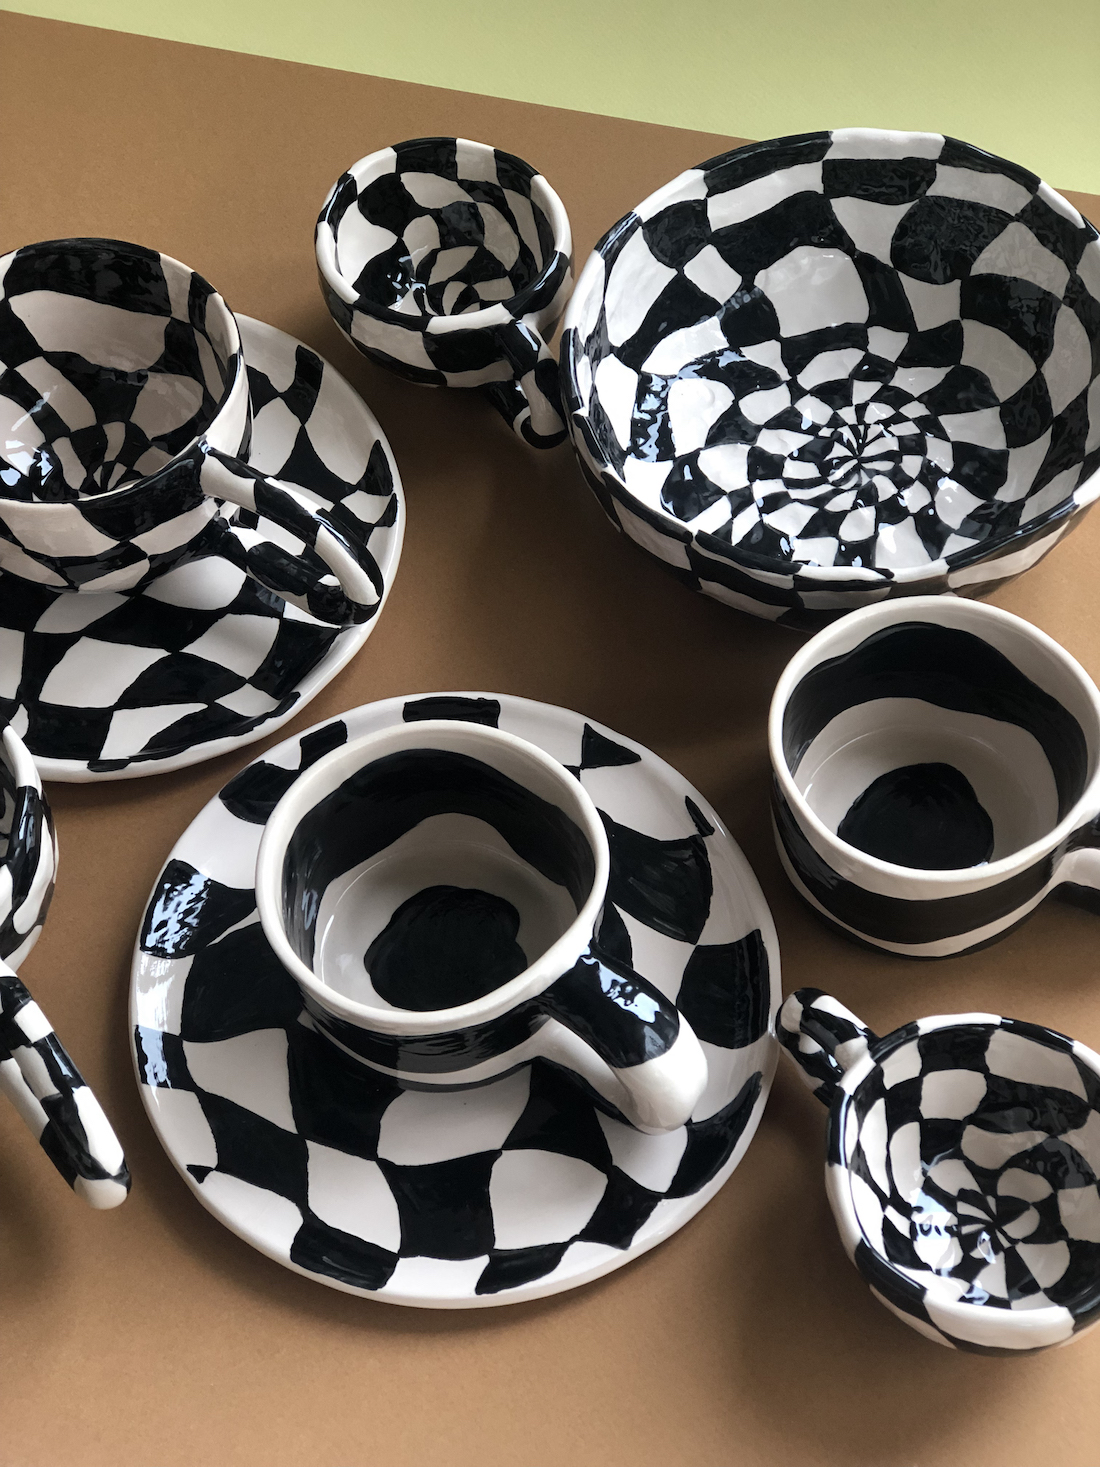 Black and white ceramic collection from Kiwi Poca